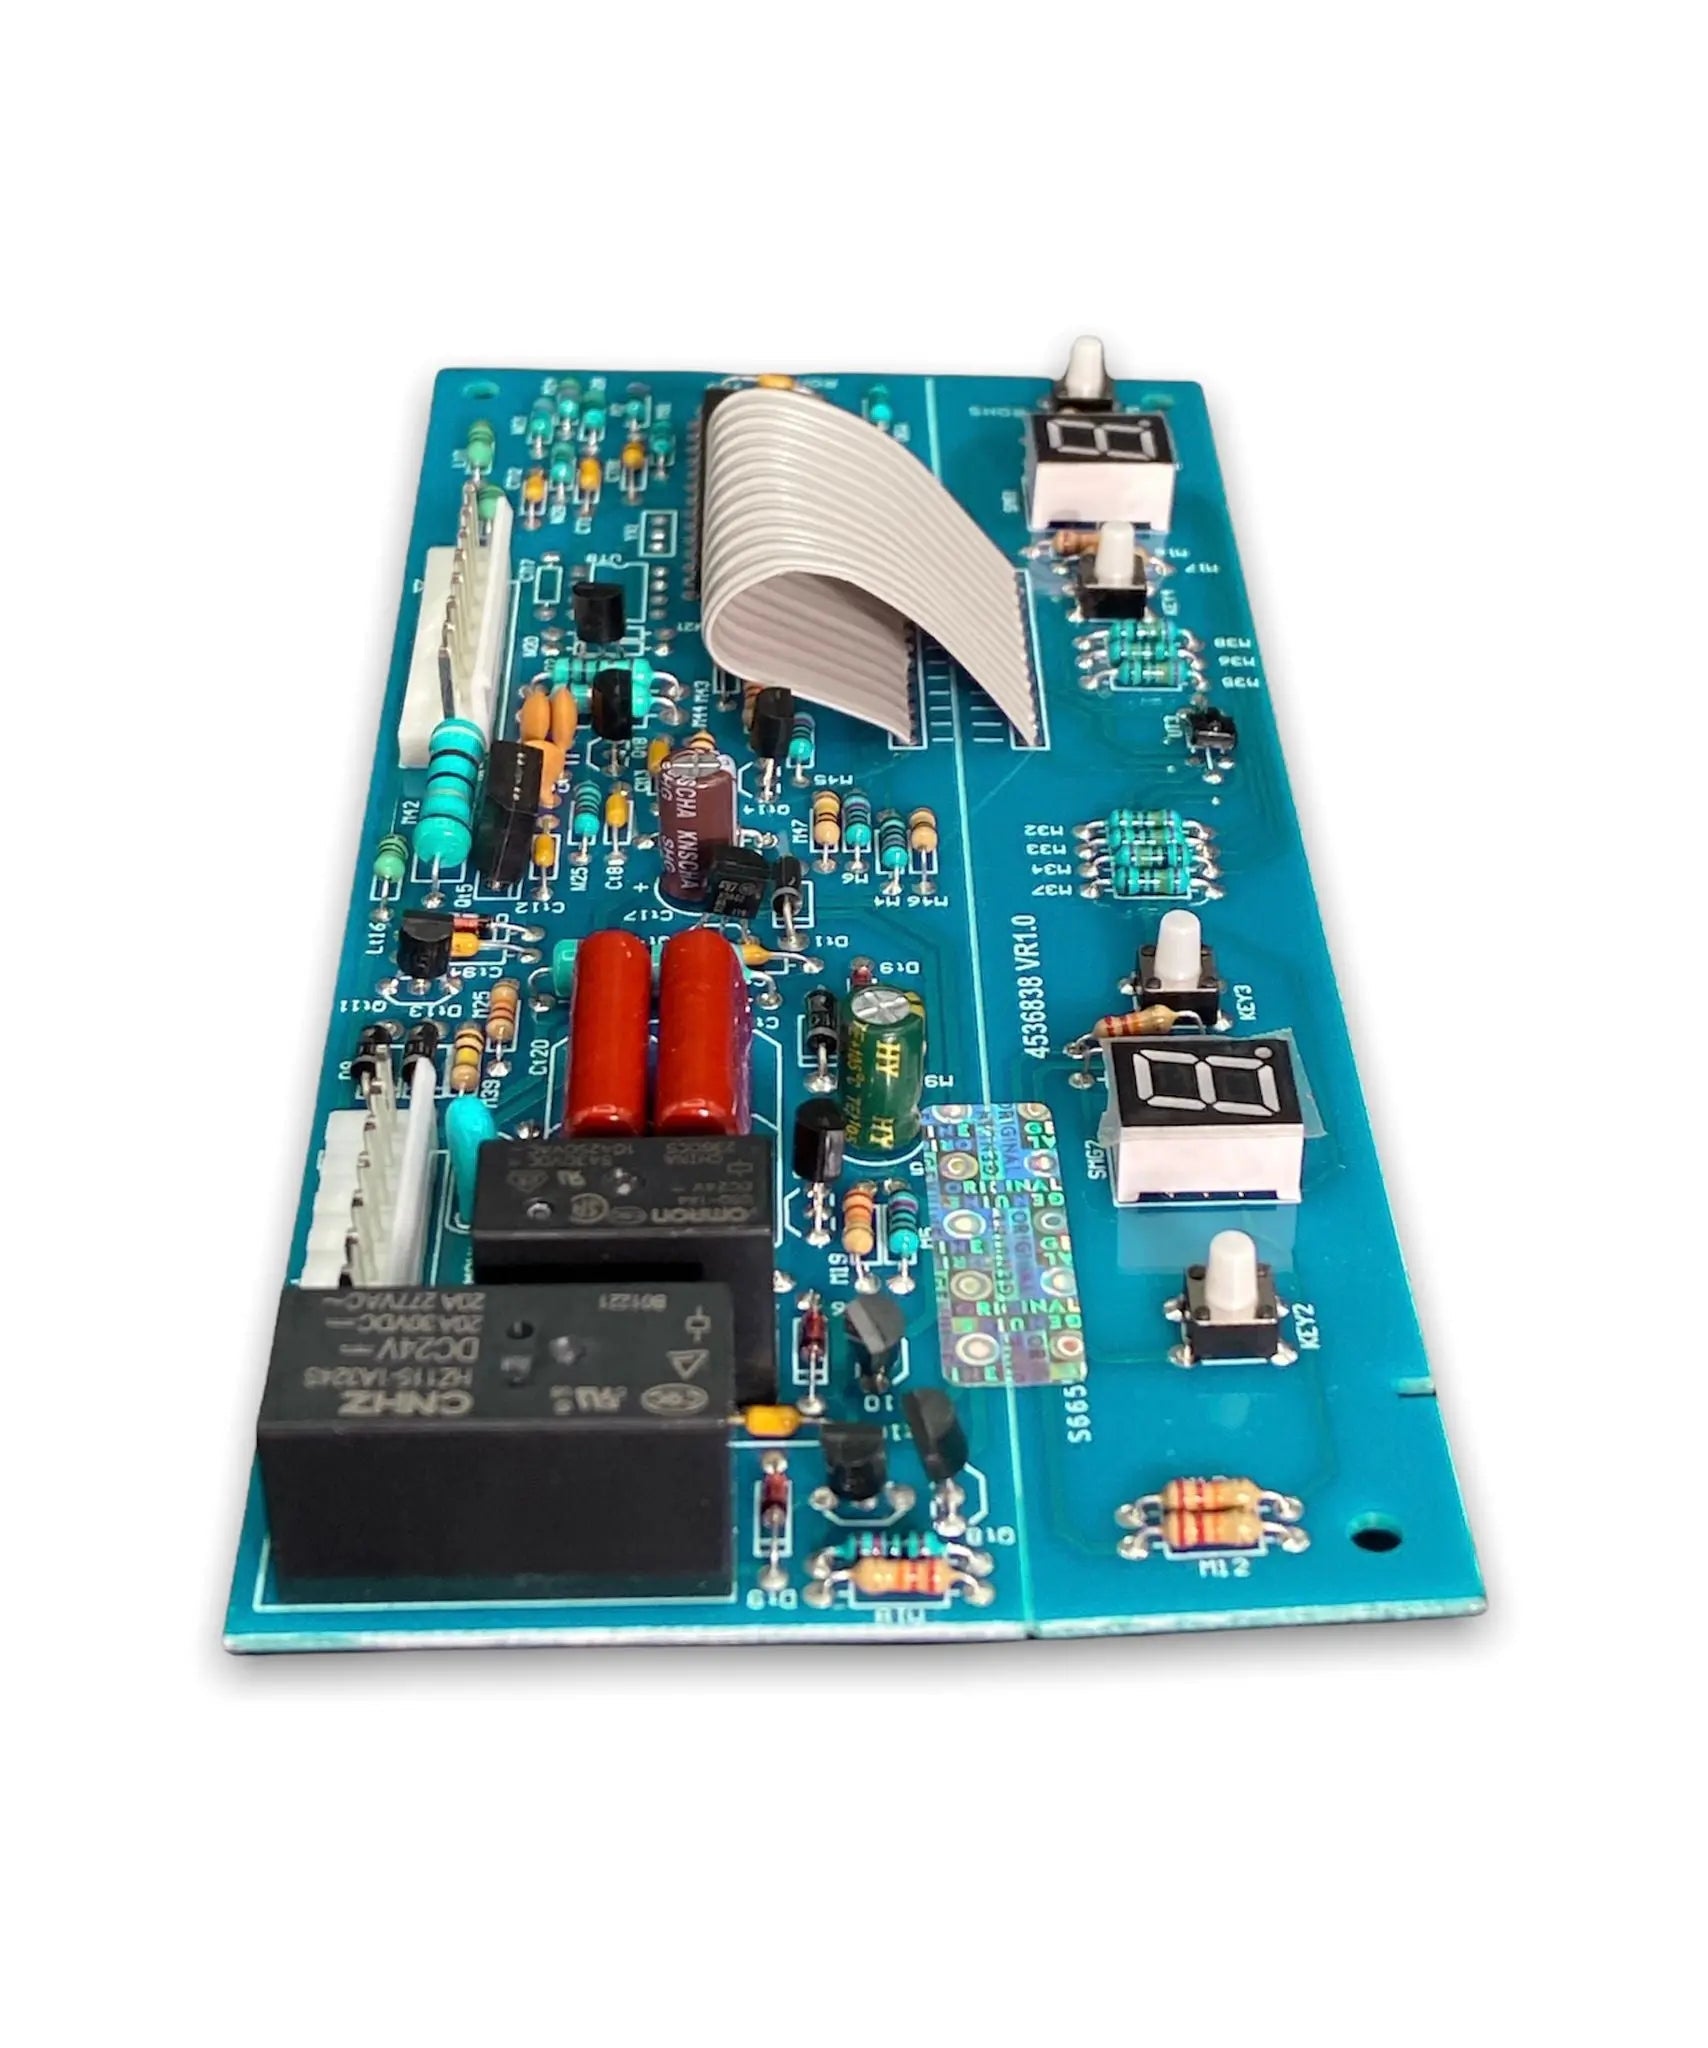 Whirlpool Refrigerator Electronic Control Board - W11524469,  REPLACES: W11321360 PD00075022 INVERTEC